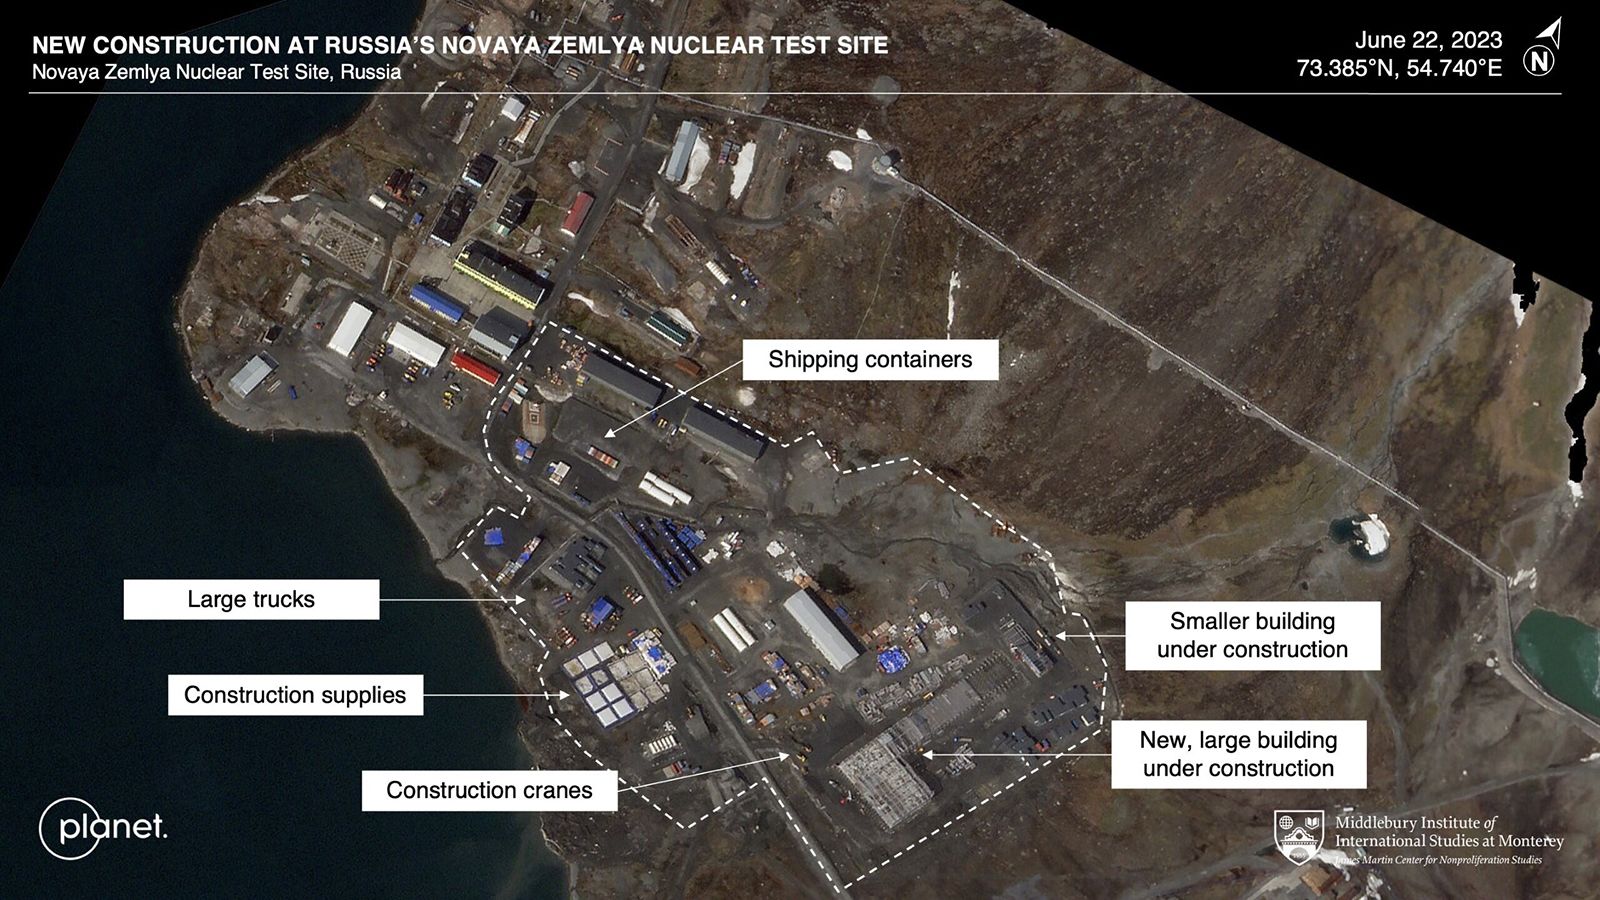 What Russia's nuclear escalation means for Washington, with world's  third-largest atomic arsenal